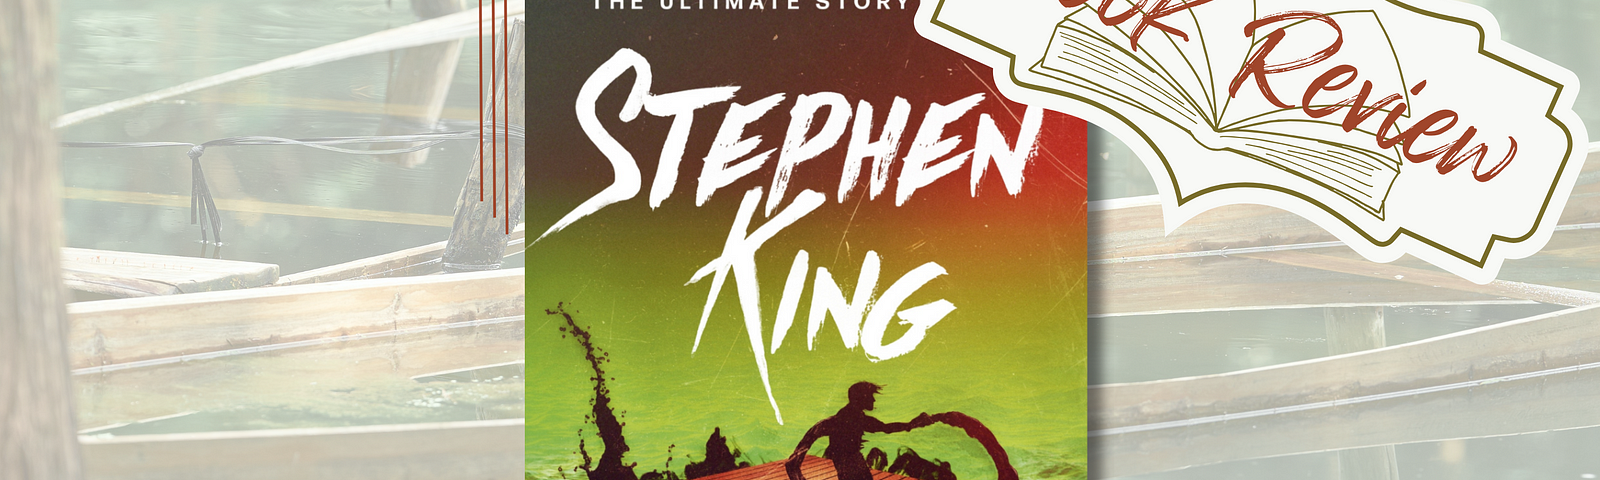 The book cover for Skeleton Crew showing a boy standing on a raft while being attacked by some black goo coming from the water. Around the book cover, there is a stamp saying book review, and another stamp saying very good and showing four stars.